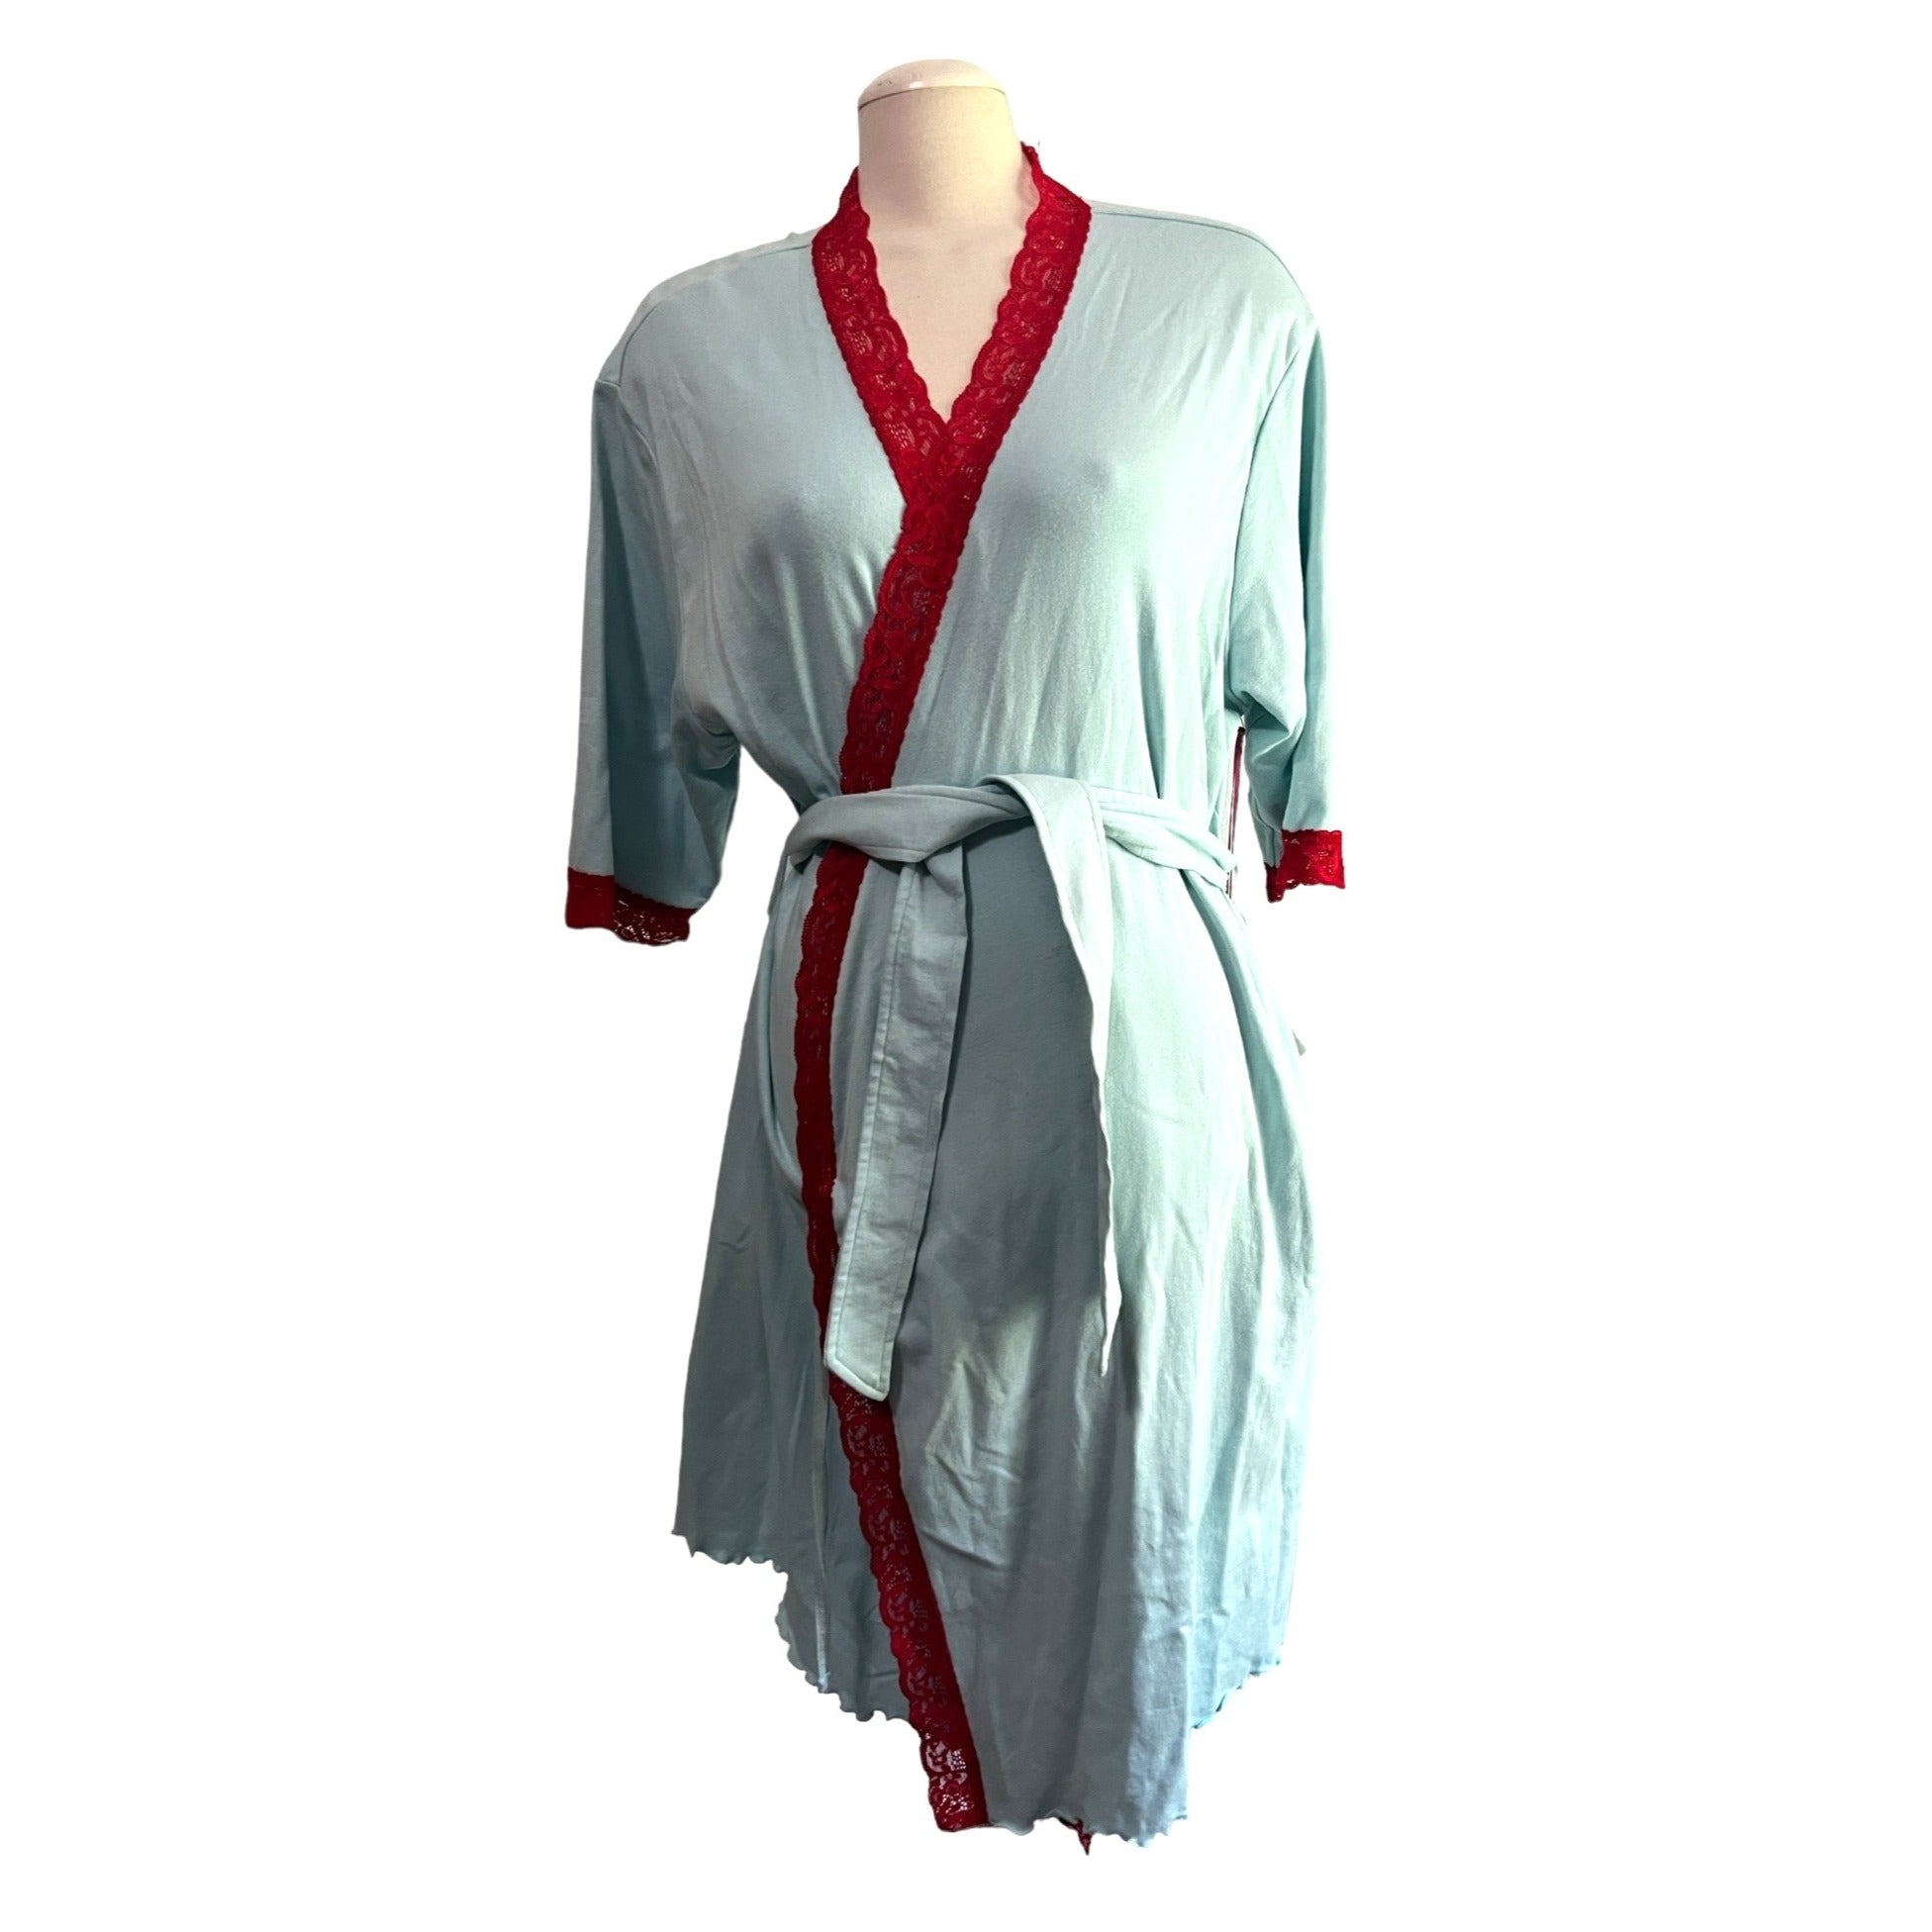 NWT Upsee Daisees Blue & Red Lace Bath Robe Sz Large Womens Short Sleeve